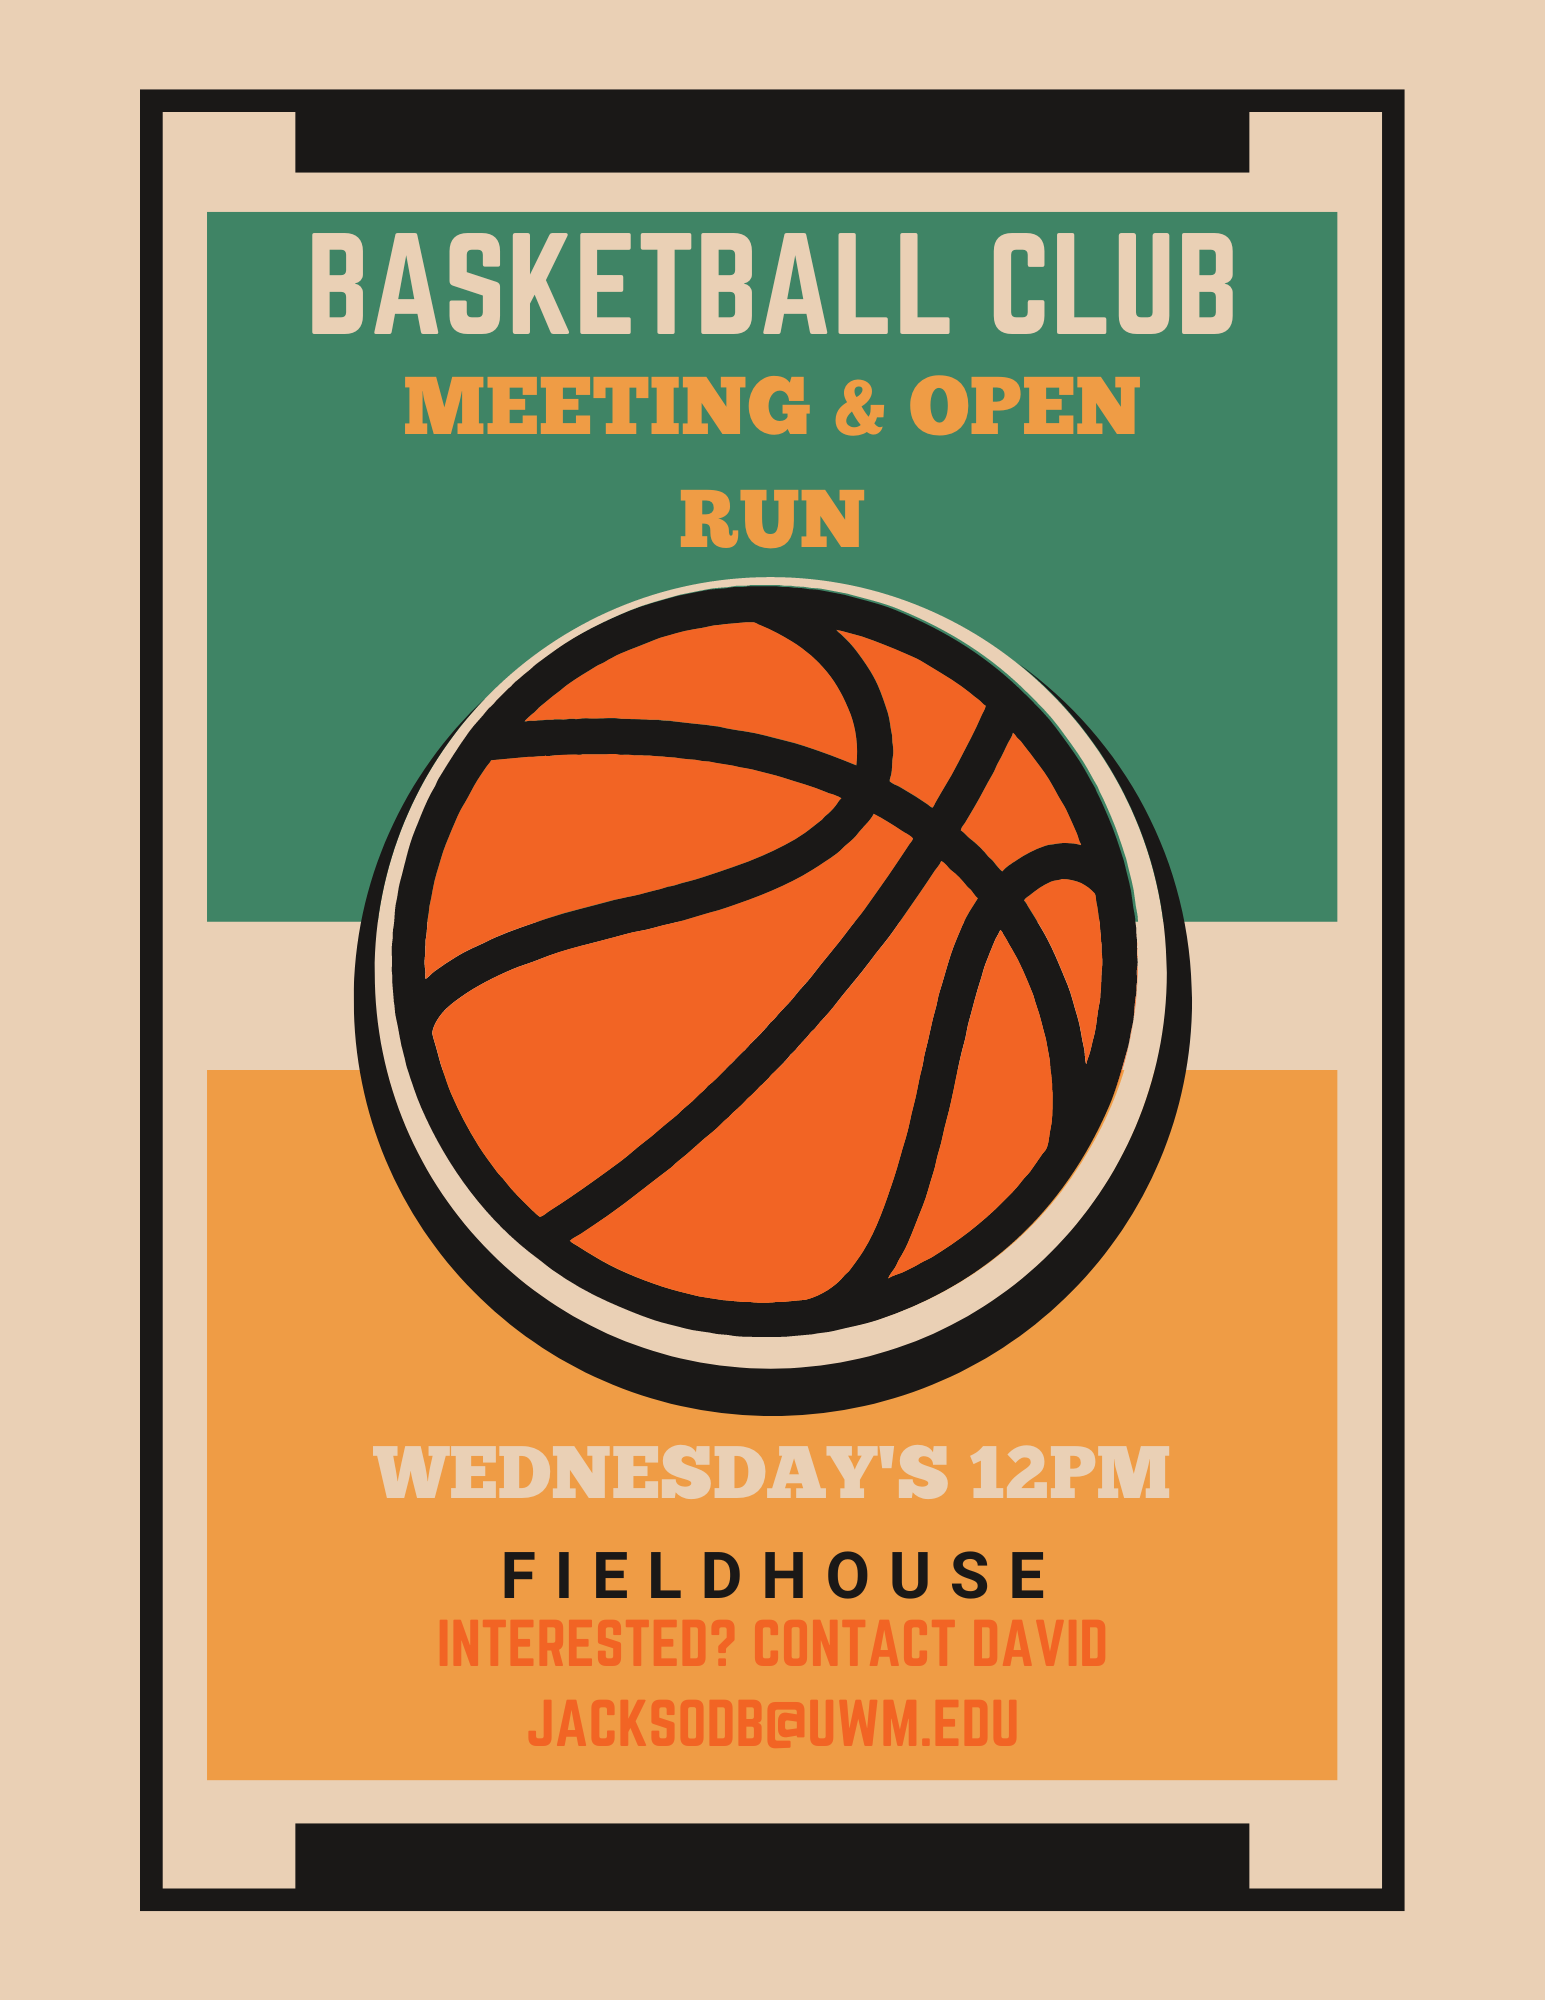 Details For Event 23647 – Basketball Club Meeting/Open Run